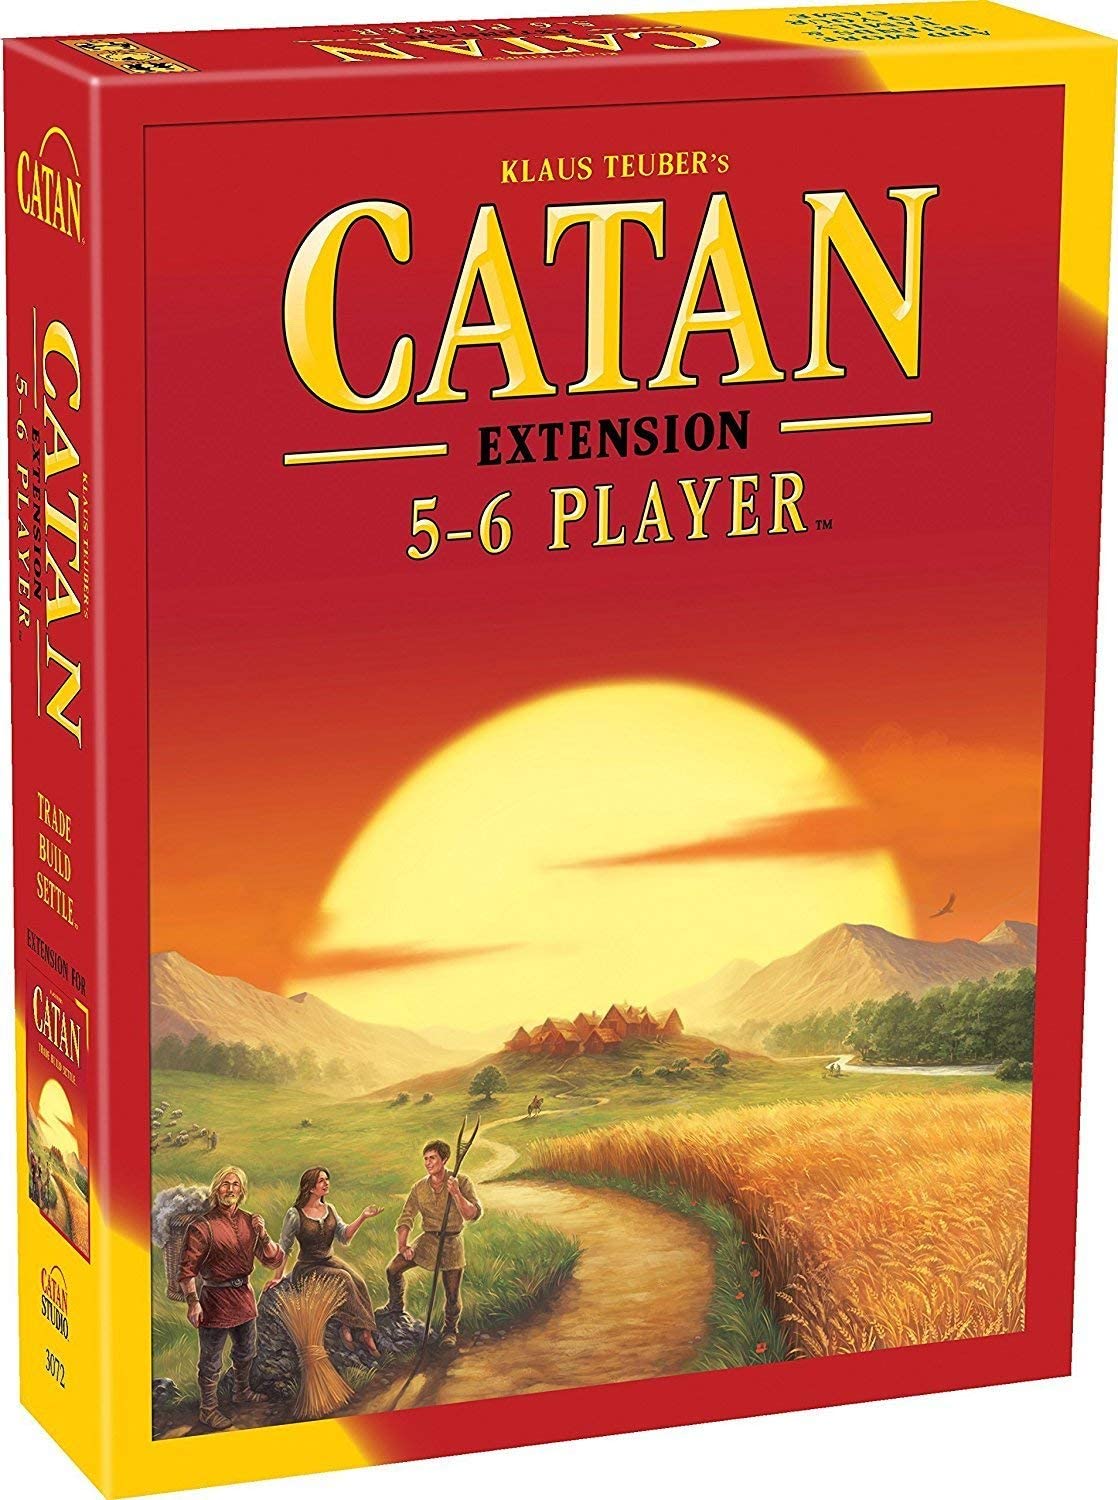 (damaged packaging) Catan Extension - 5-6 Player